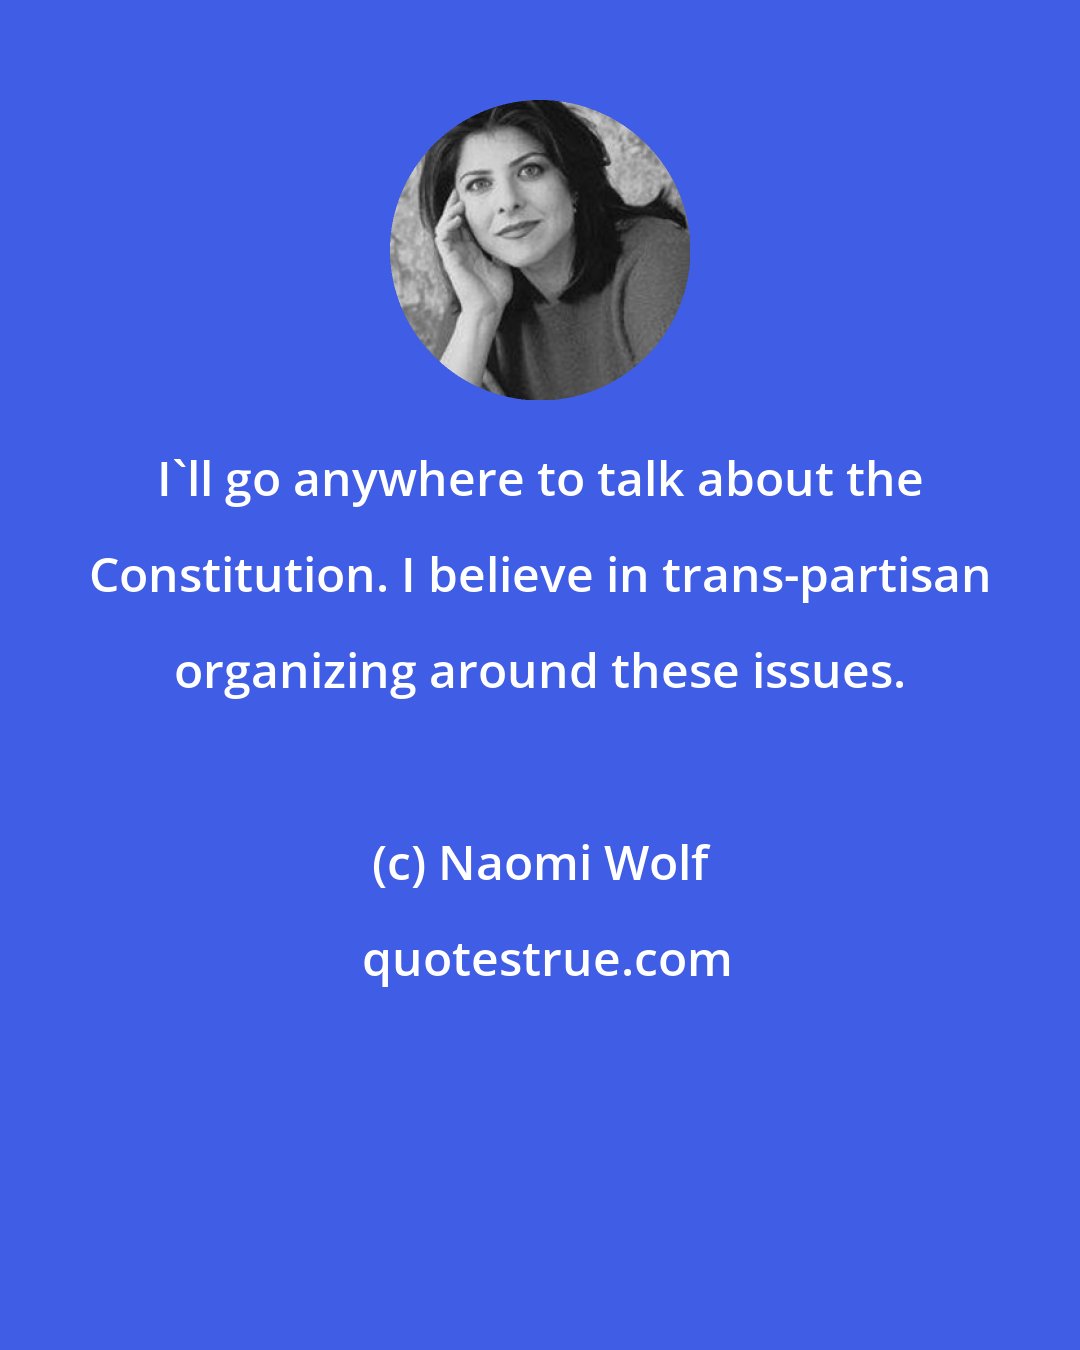 Naomi Wolf: I'll go anywhere to talk about the Constitution. I believe in trans-partisan organizing around these issues.